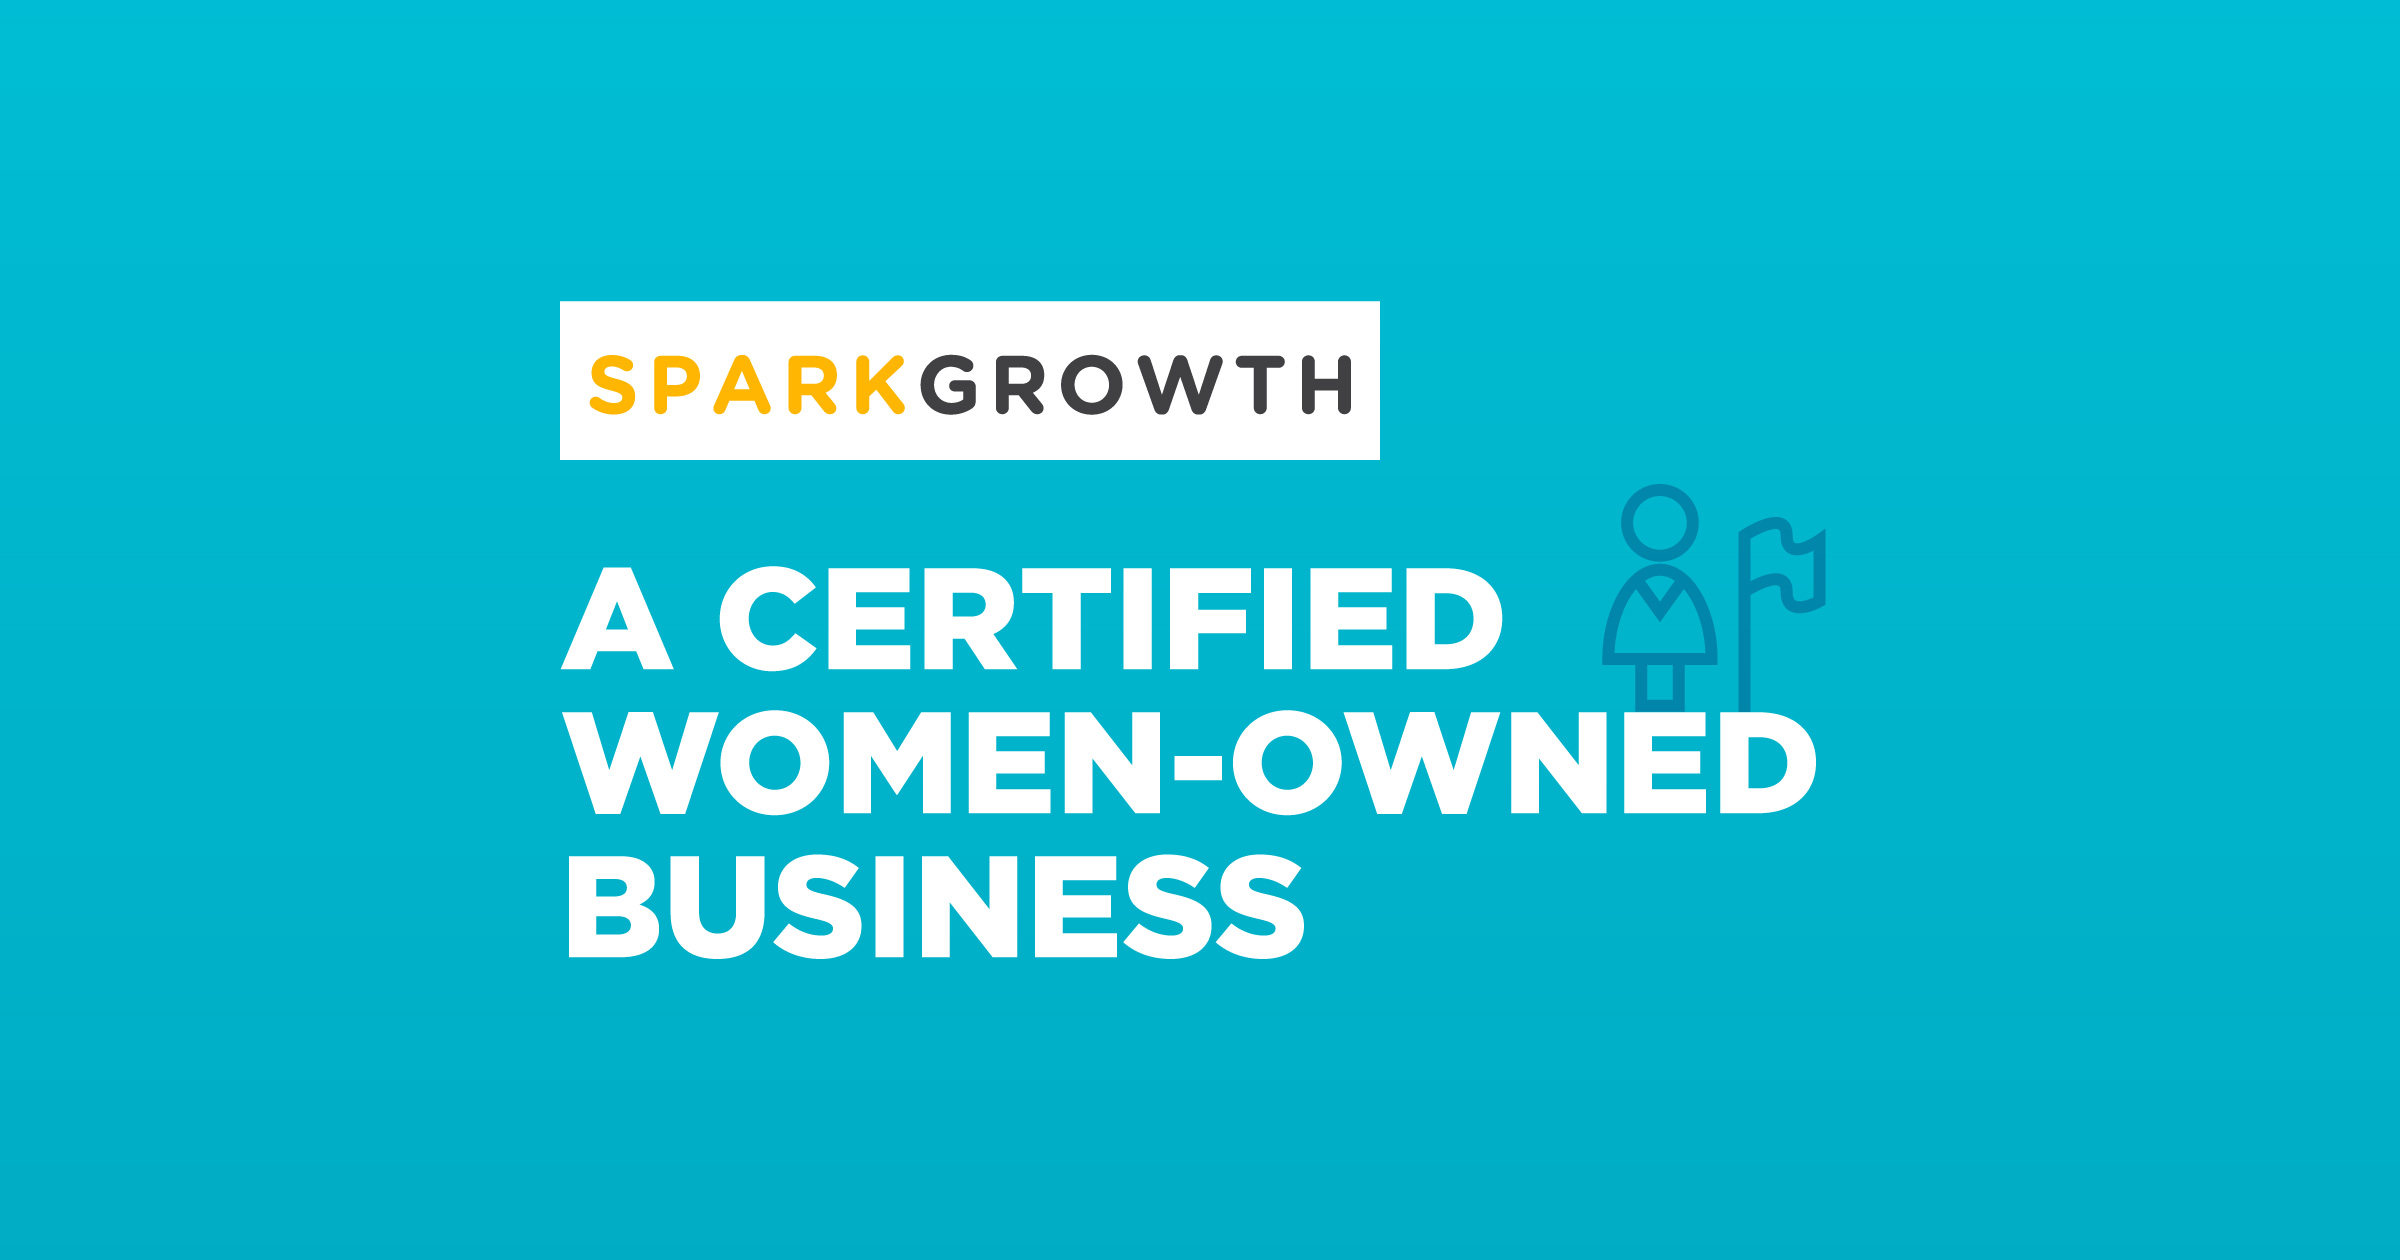 Women-owned business